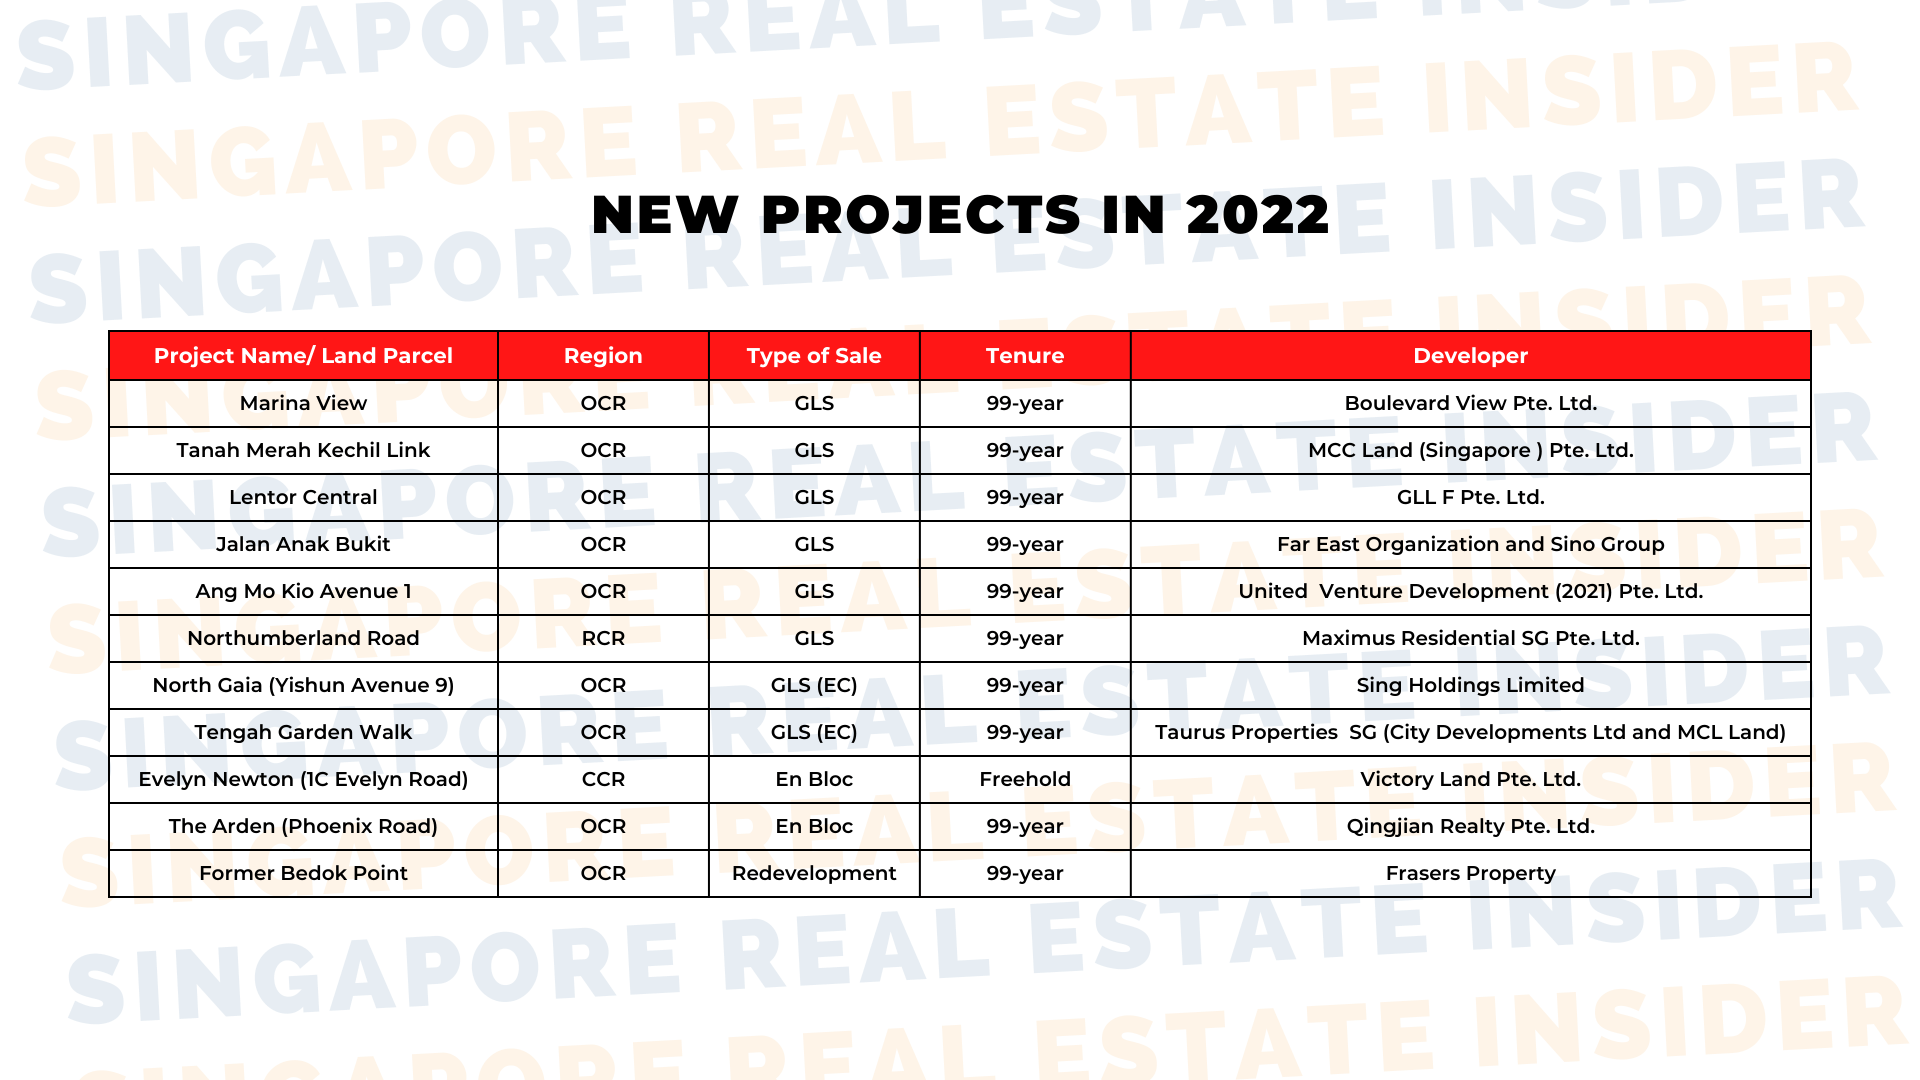 New Projects in 2022